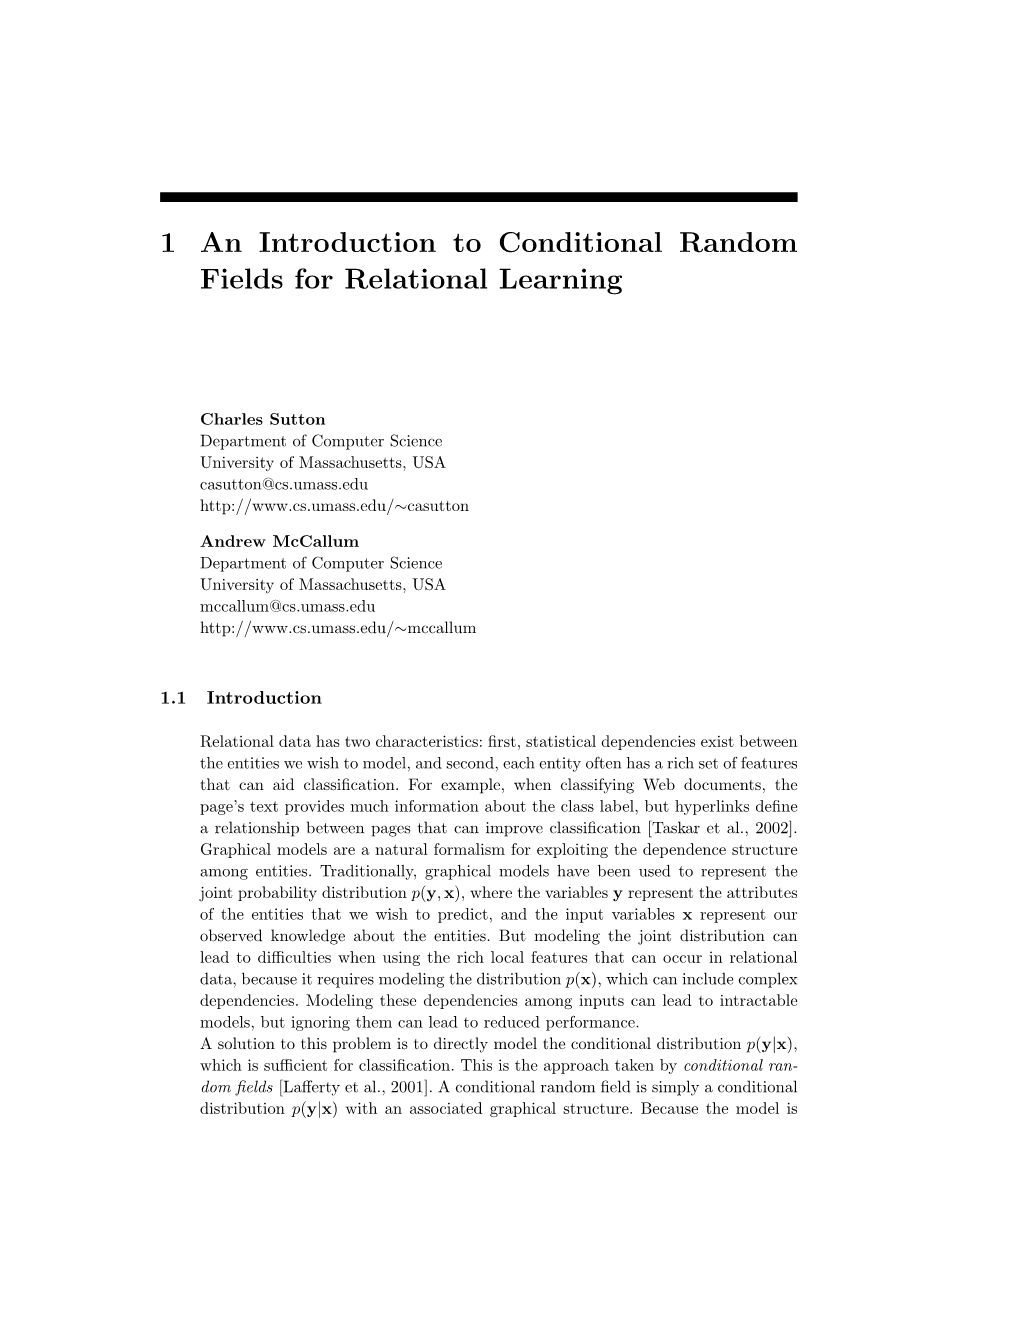 1 an Introduction to Conditional Random Fields for Relational Learning